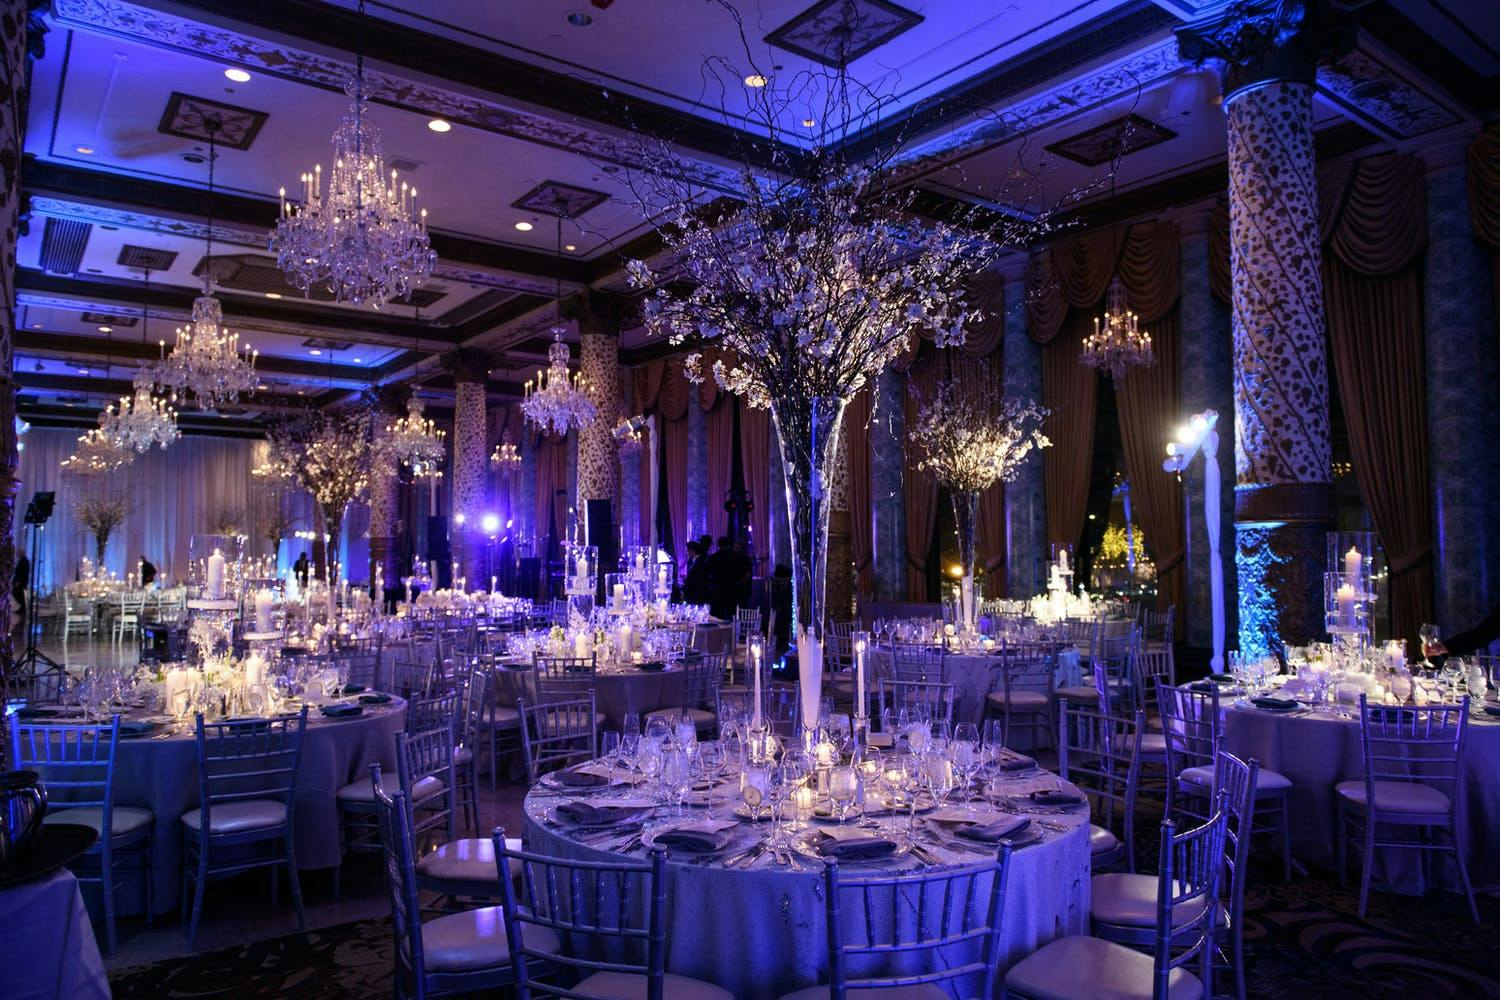 Glamorous winter wedding with purple uplighting and tree branch winter wedding centerpieces at The Drake Hotel | PartySlate